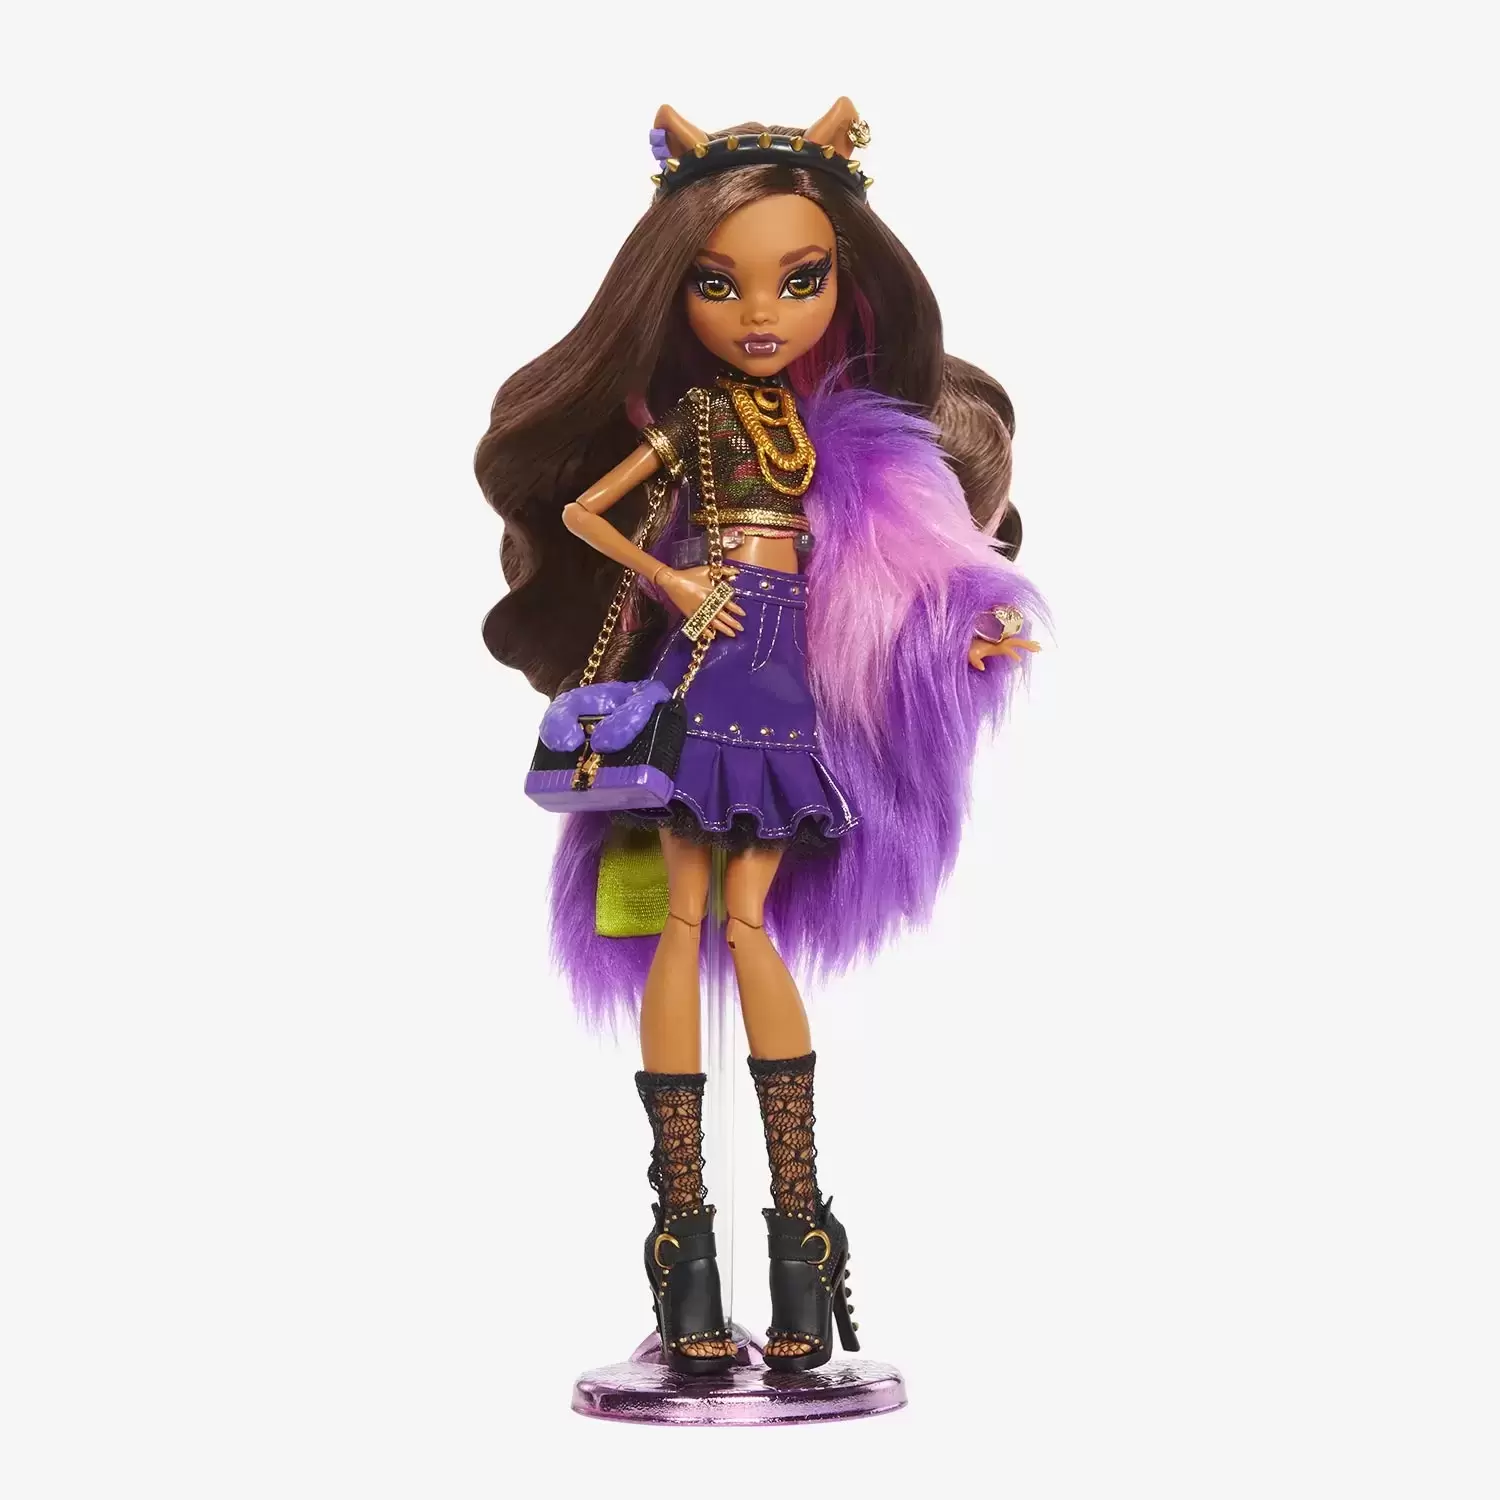 annabell andrews recommends Pictures Of Clawdeen From Monster High